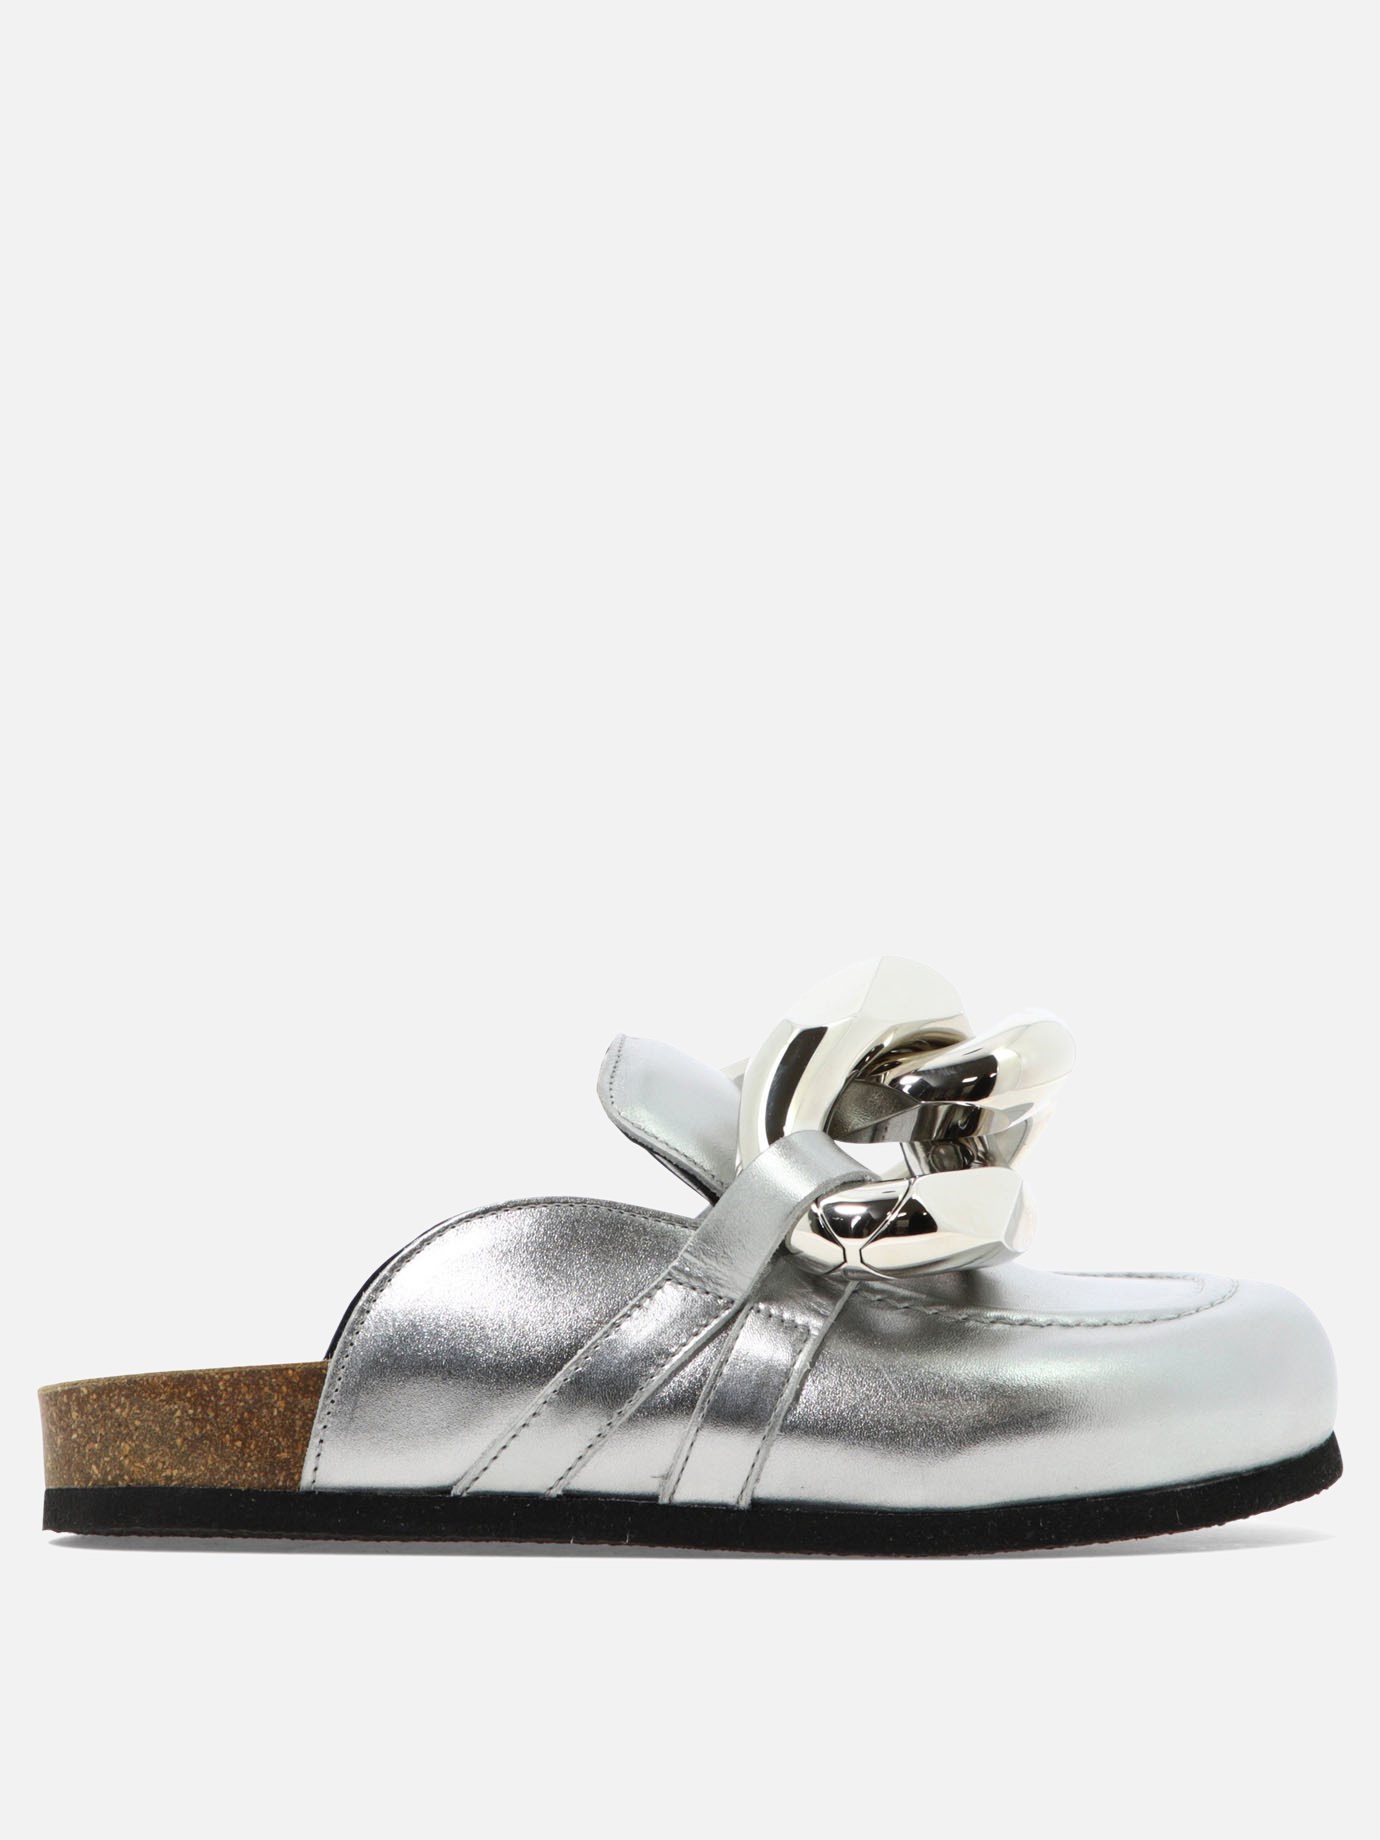 Slipper  Chain by JW Anderson - 3